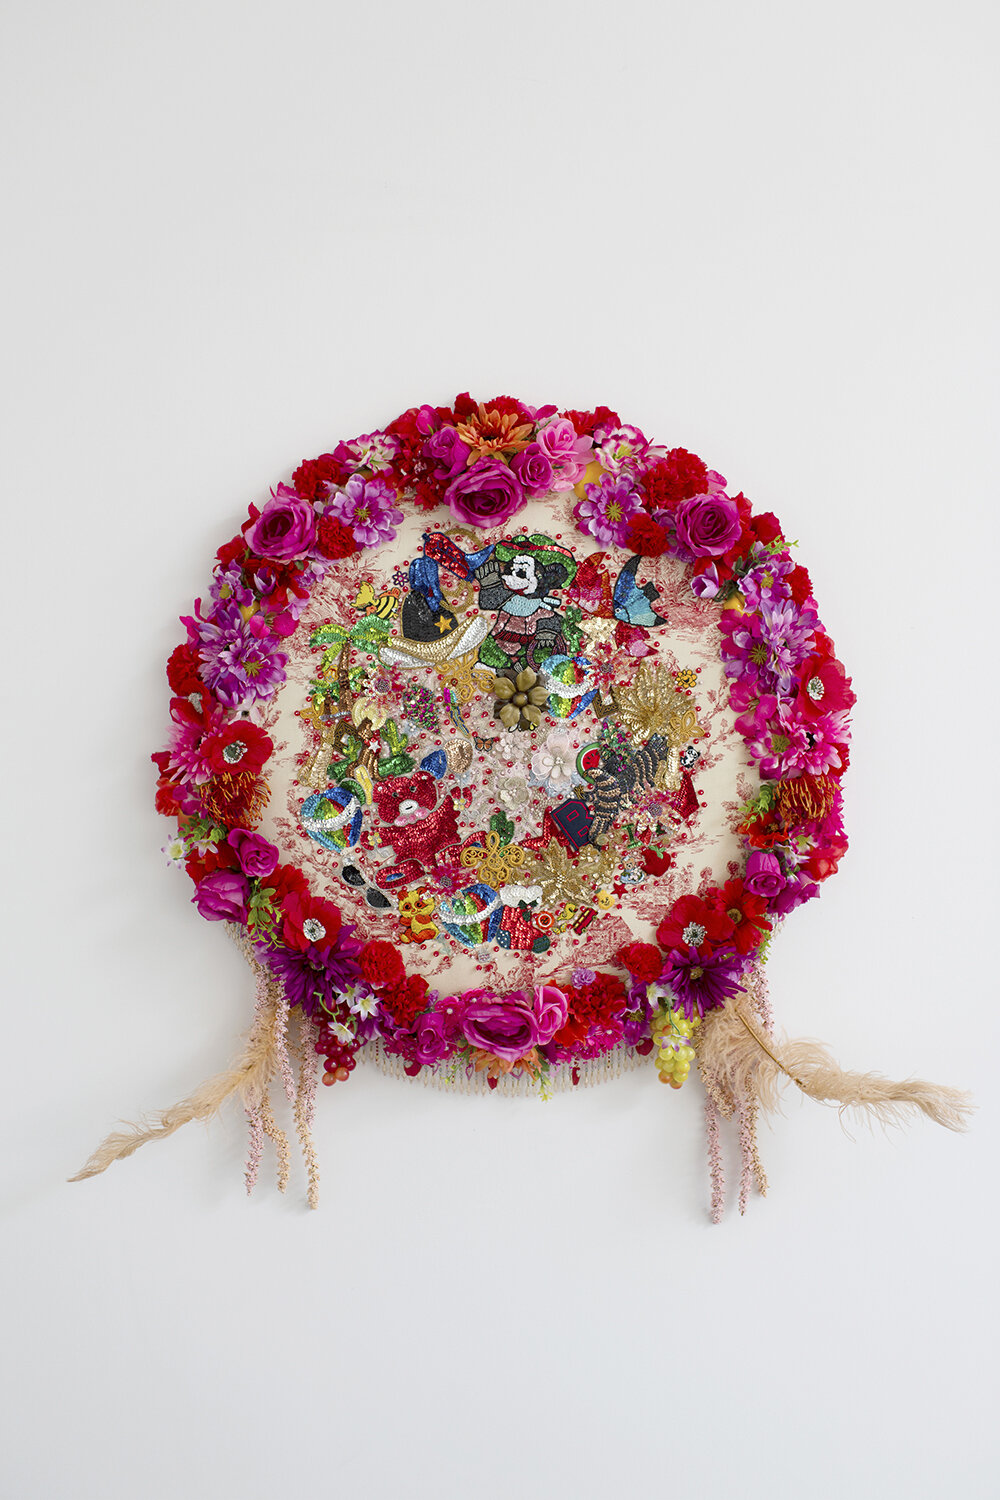   Elegy #4 , 2019, Crystal and plastic beads, sequin patches, found fabric, trim, fabric flowers, ostrich feathers, polyester batting, plywood, thread, 44 x 44 x 5” 